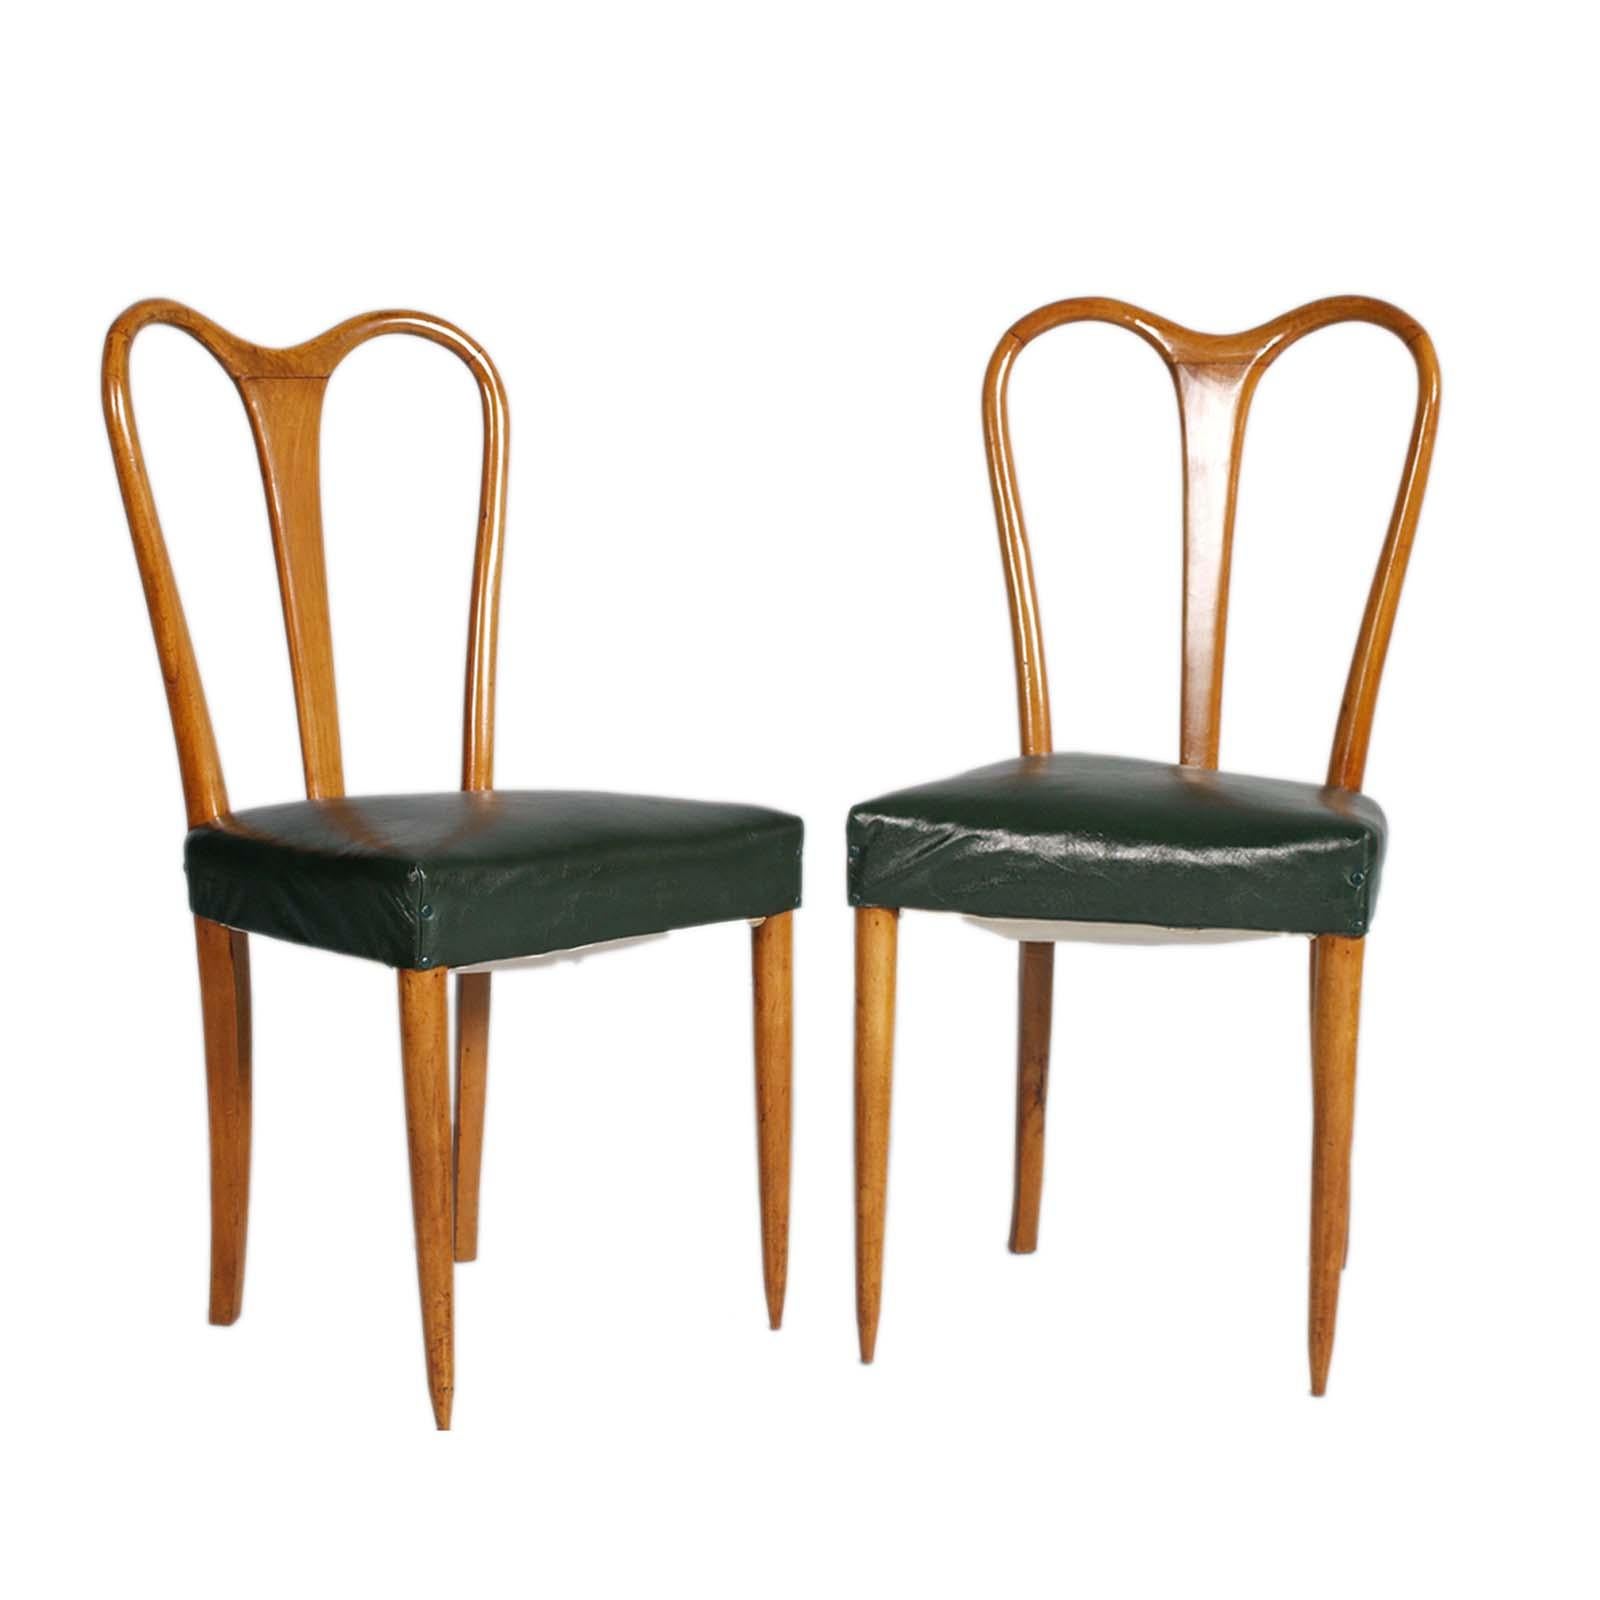 Lacquered Mid-Century Chairs by Ico Parisi for Fratelli Rizzi, Springs Seat & Leatherette